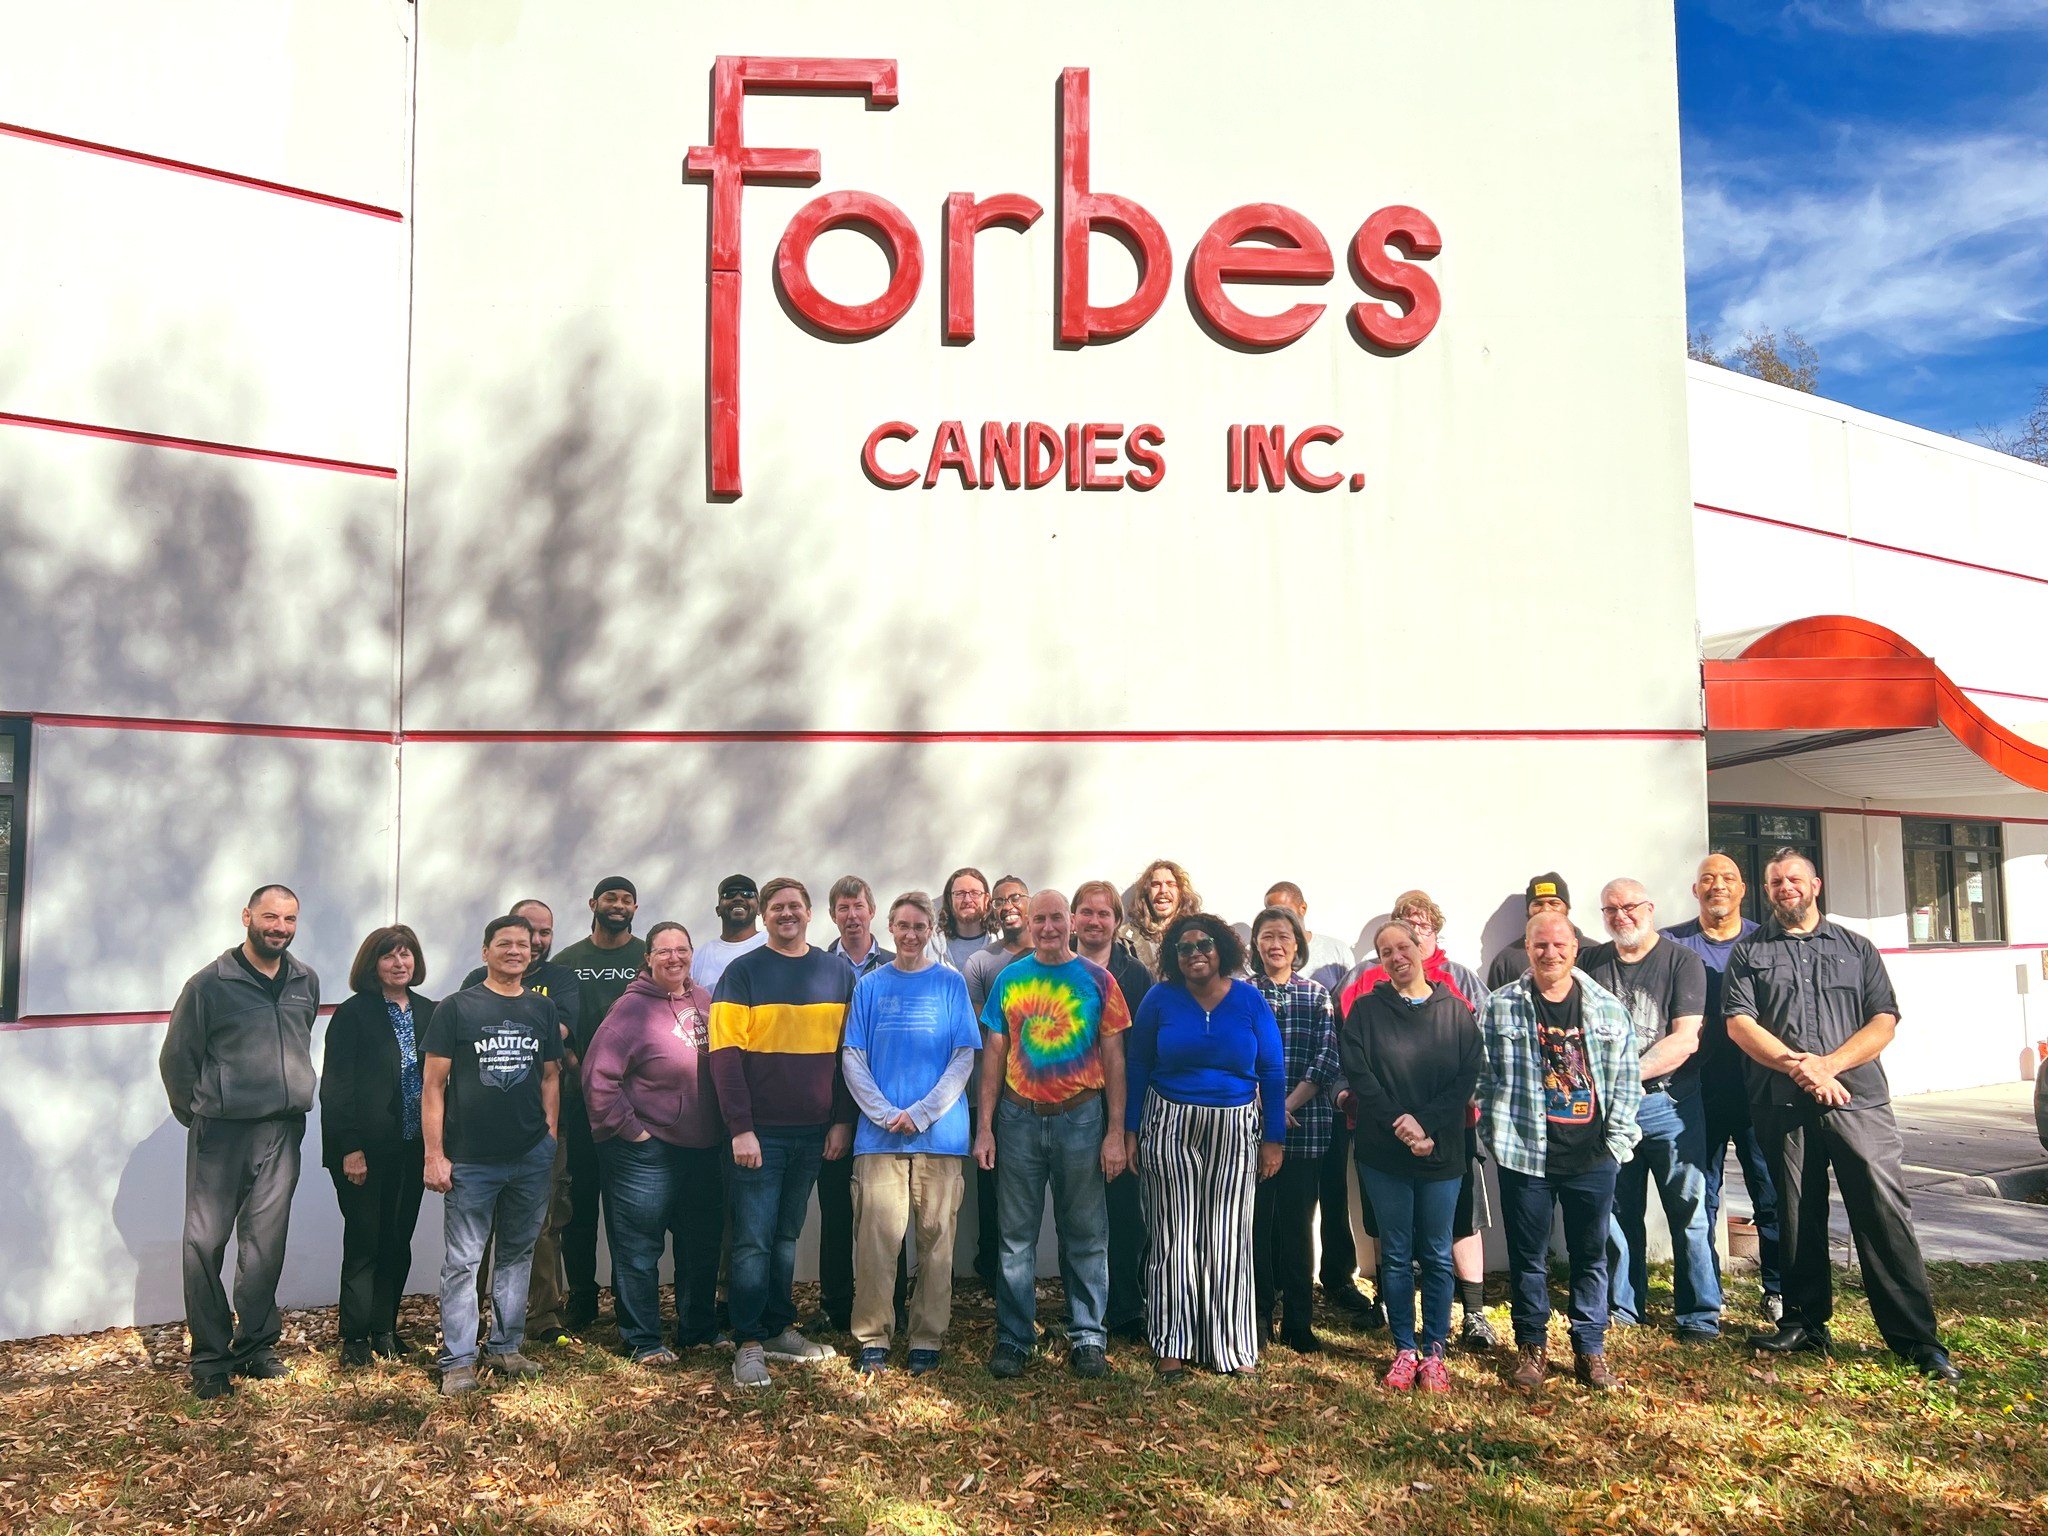 Happy International Family Day from our Forbes Candies family to yours! What candy reminds you of your family? Let us know in the comments!

#InternationalFamilyDay #ForbesCandies #shoplocal #HandmadeSweets